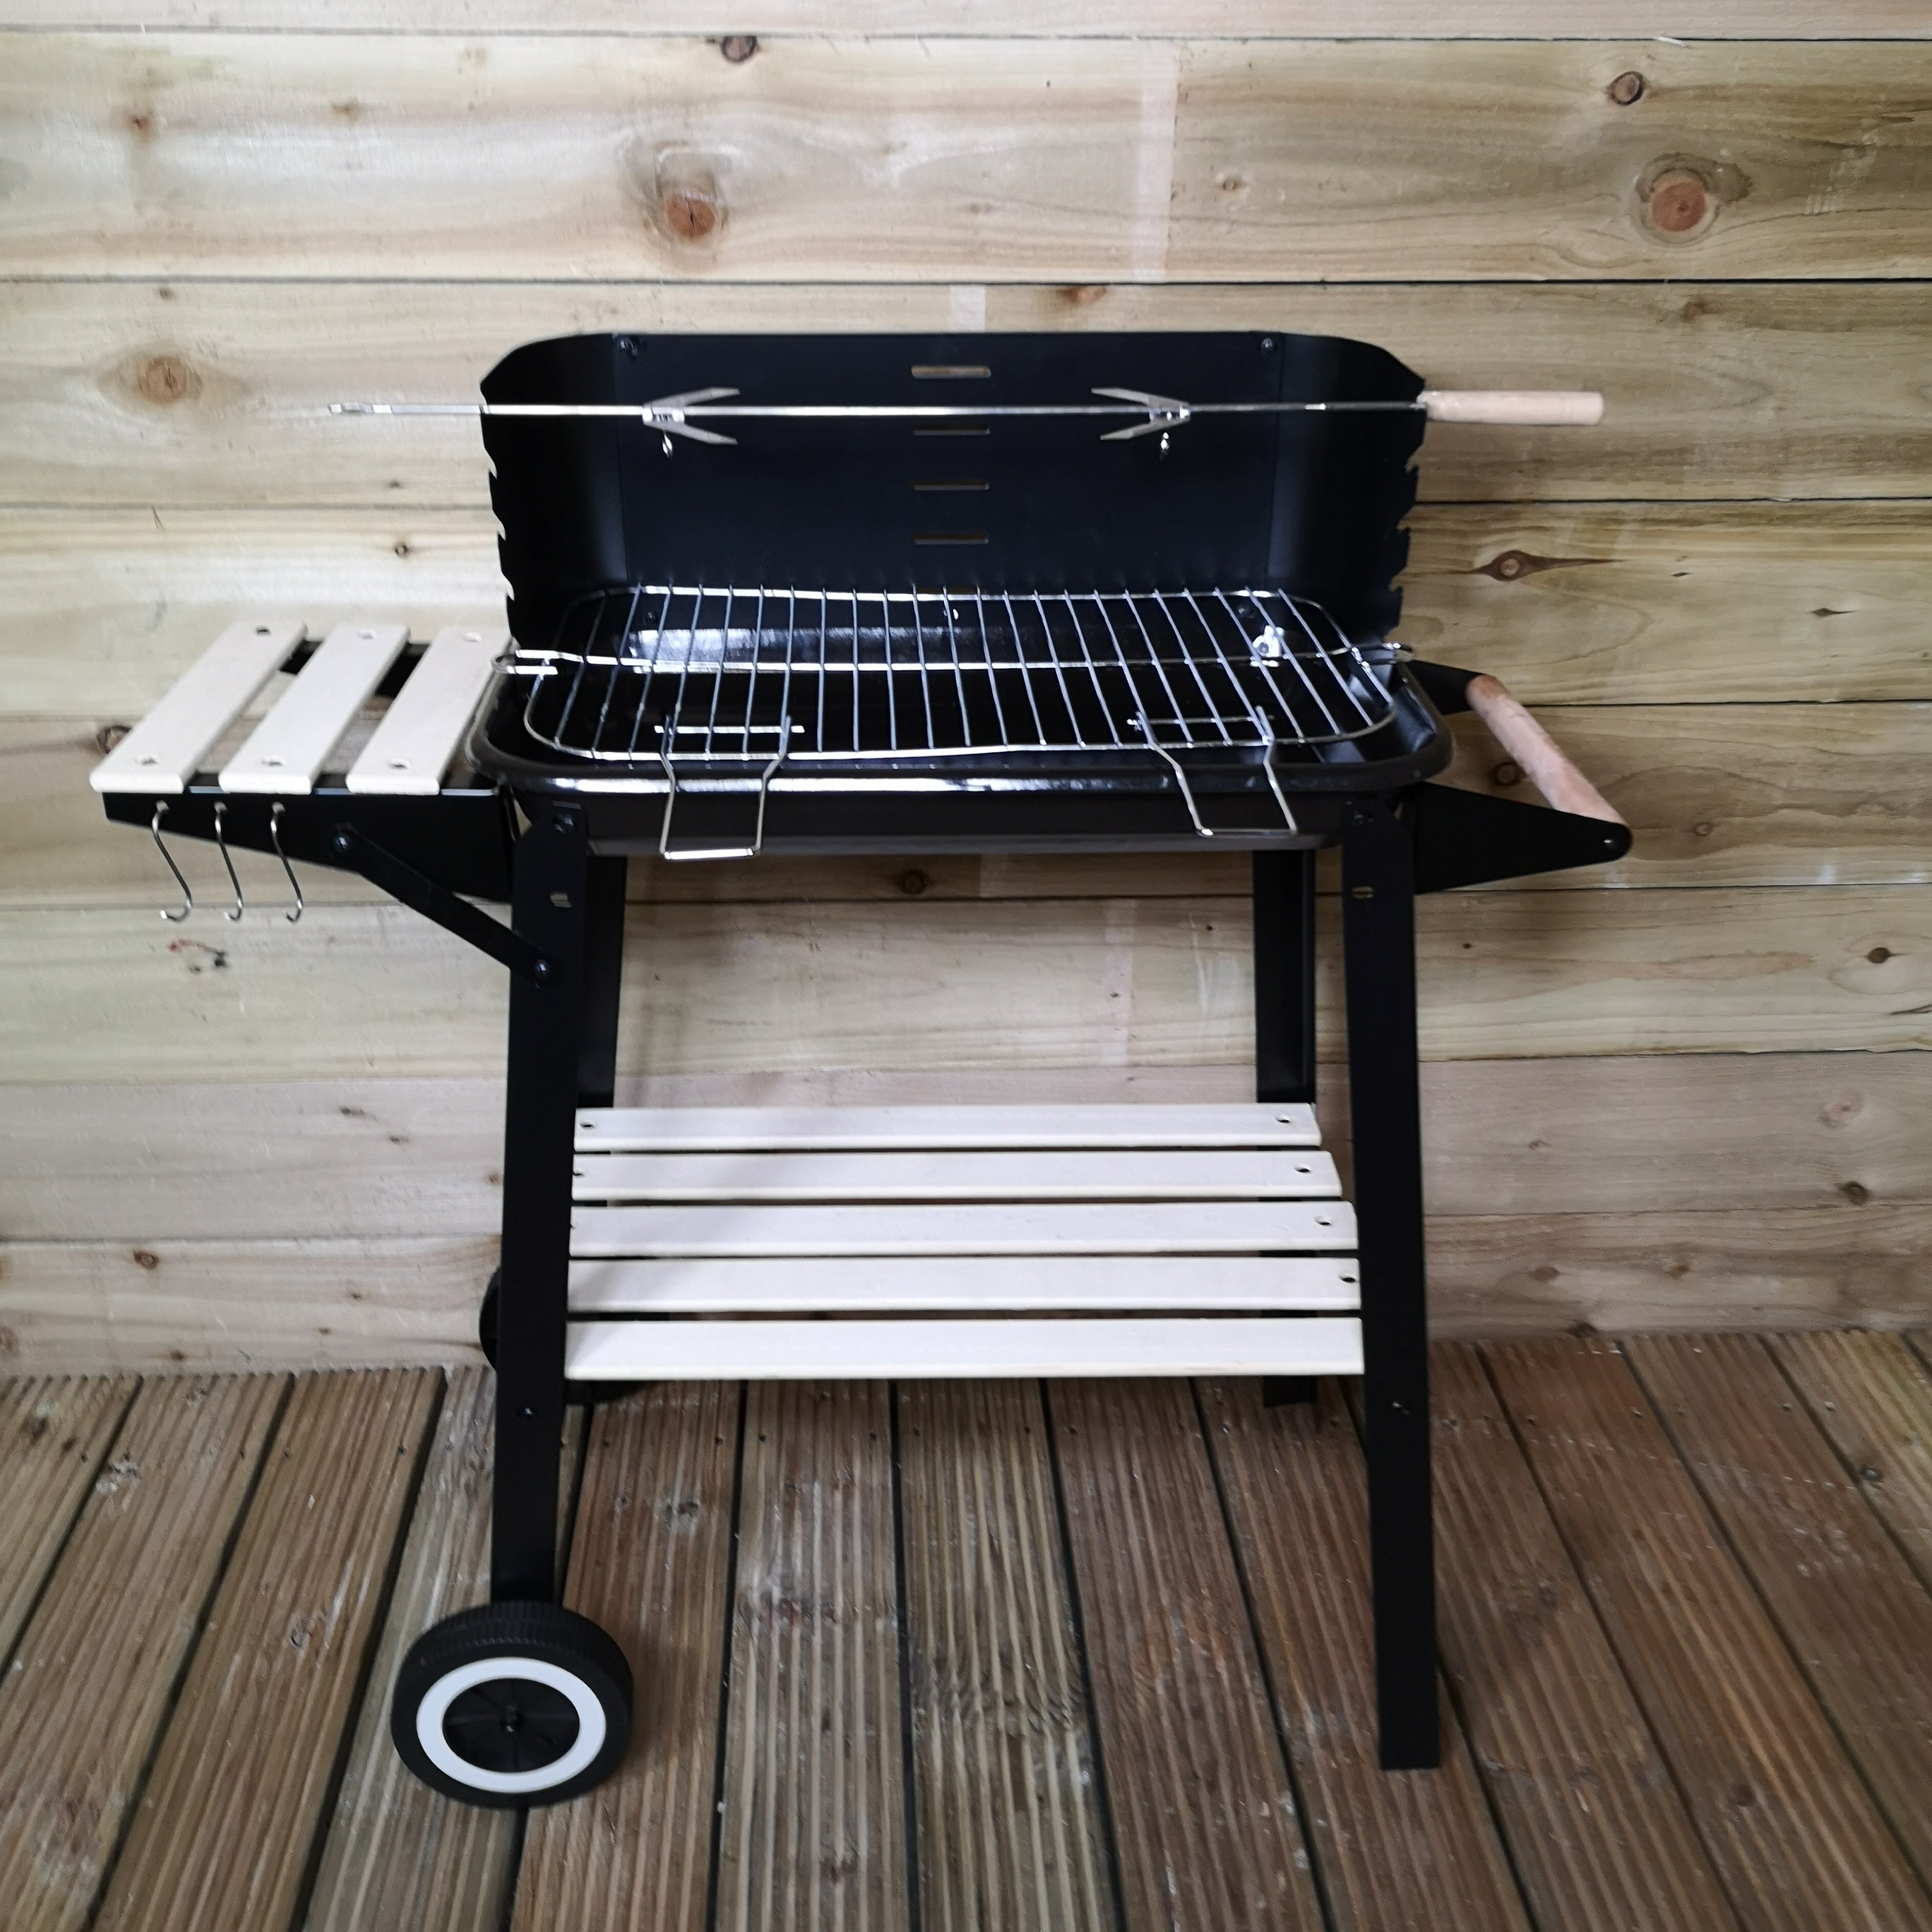 Rectangular Trolley Charcoal BBQ With Wheels Black with Wooden Shelves 54 x 34 x 65cm